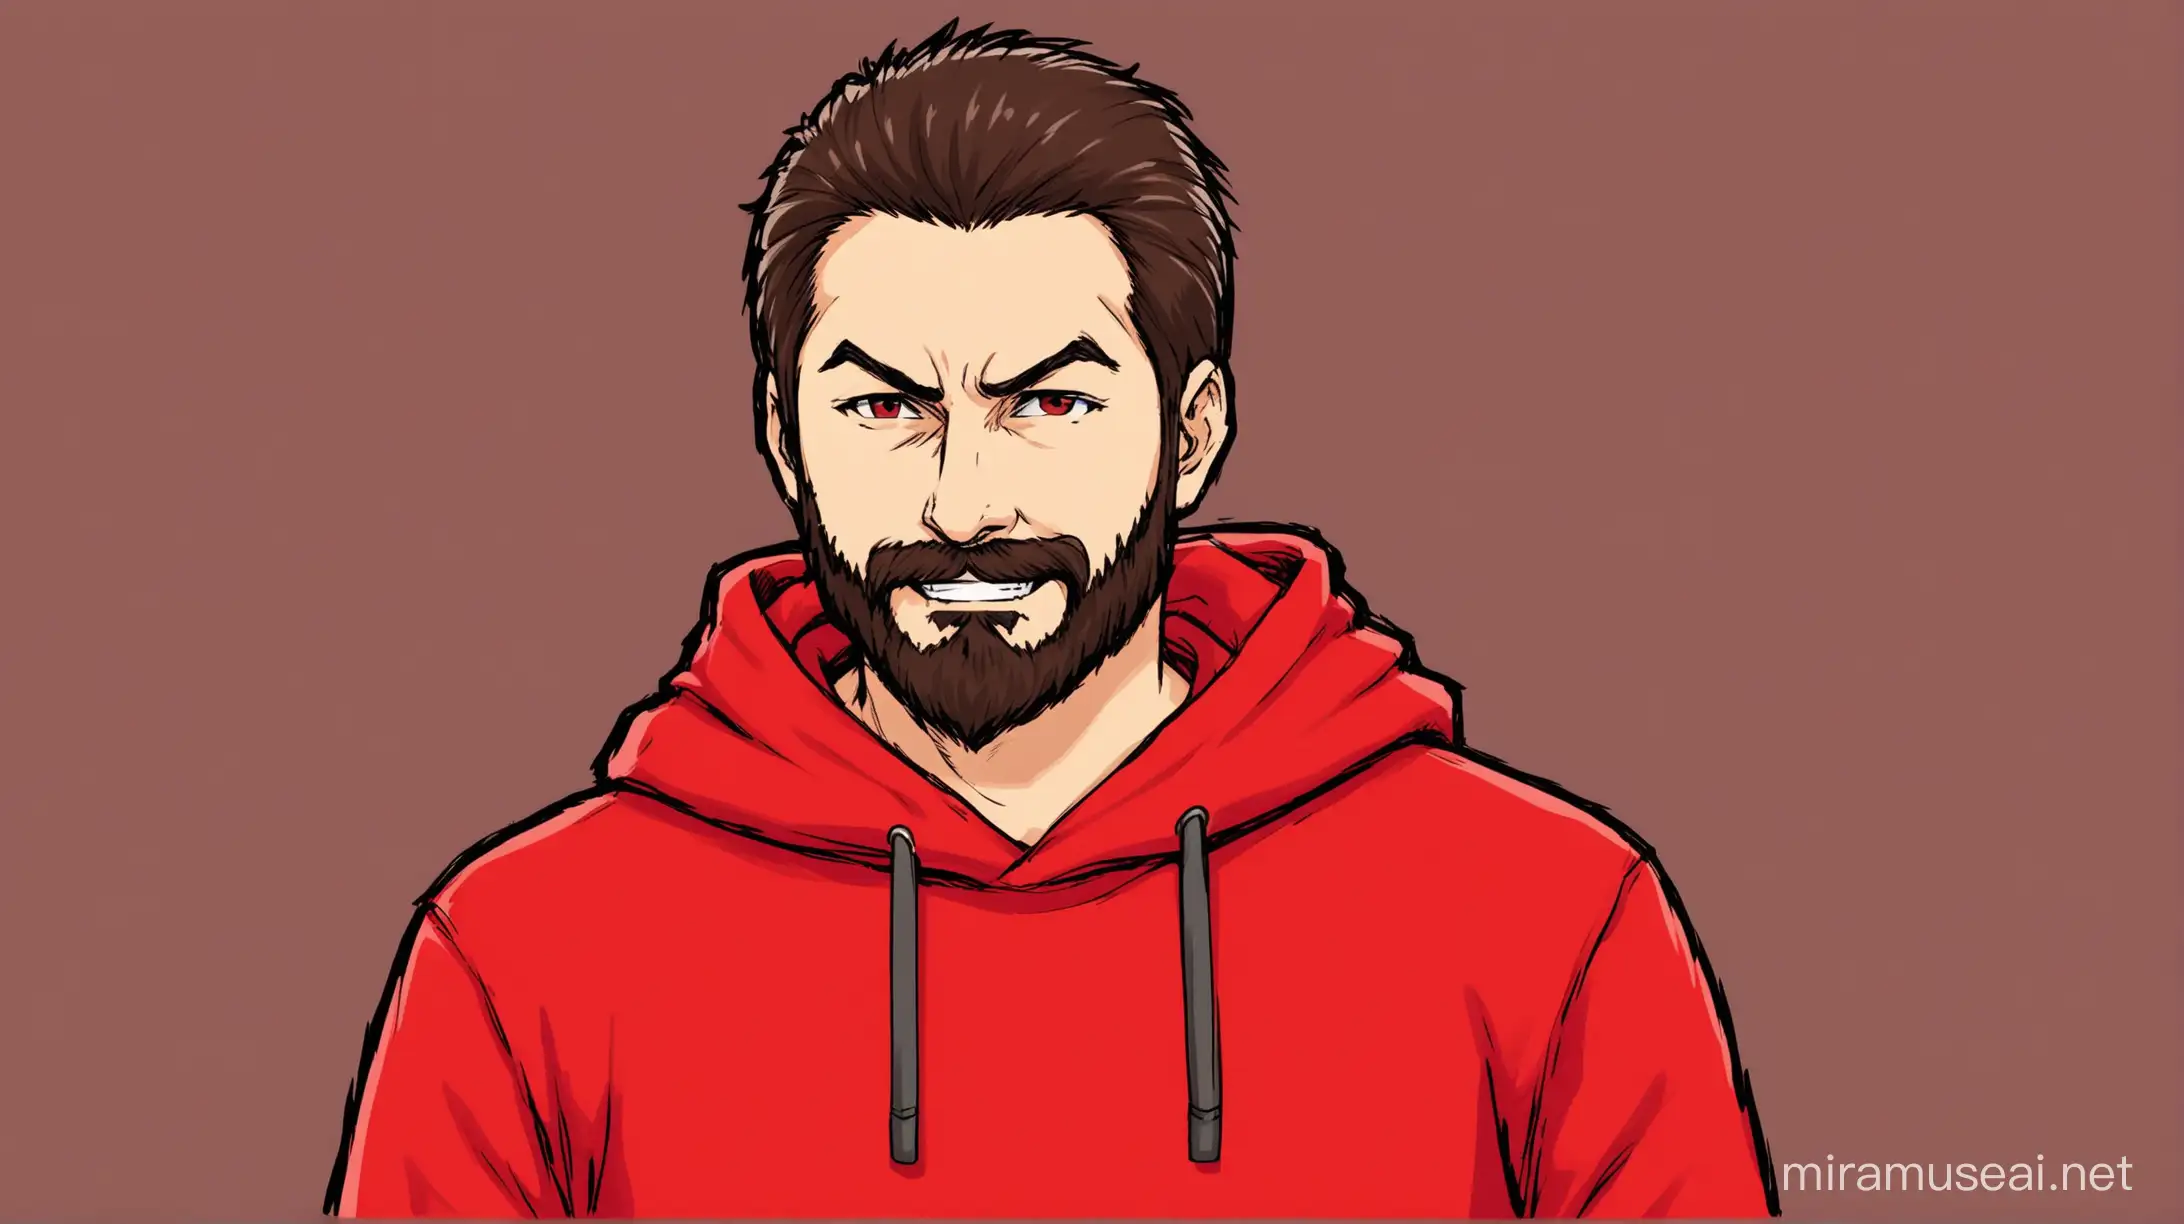 Create a thumbnail for 'This Makes You DANGEROUS as a Man (You MUST Know This)'  Keep the design simple yet attention-grabbing, avoiding a busy background. The man in the thumbnail should wear a red hoodie and have a small, evil smile on his face, along with a patchy beard."